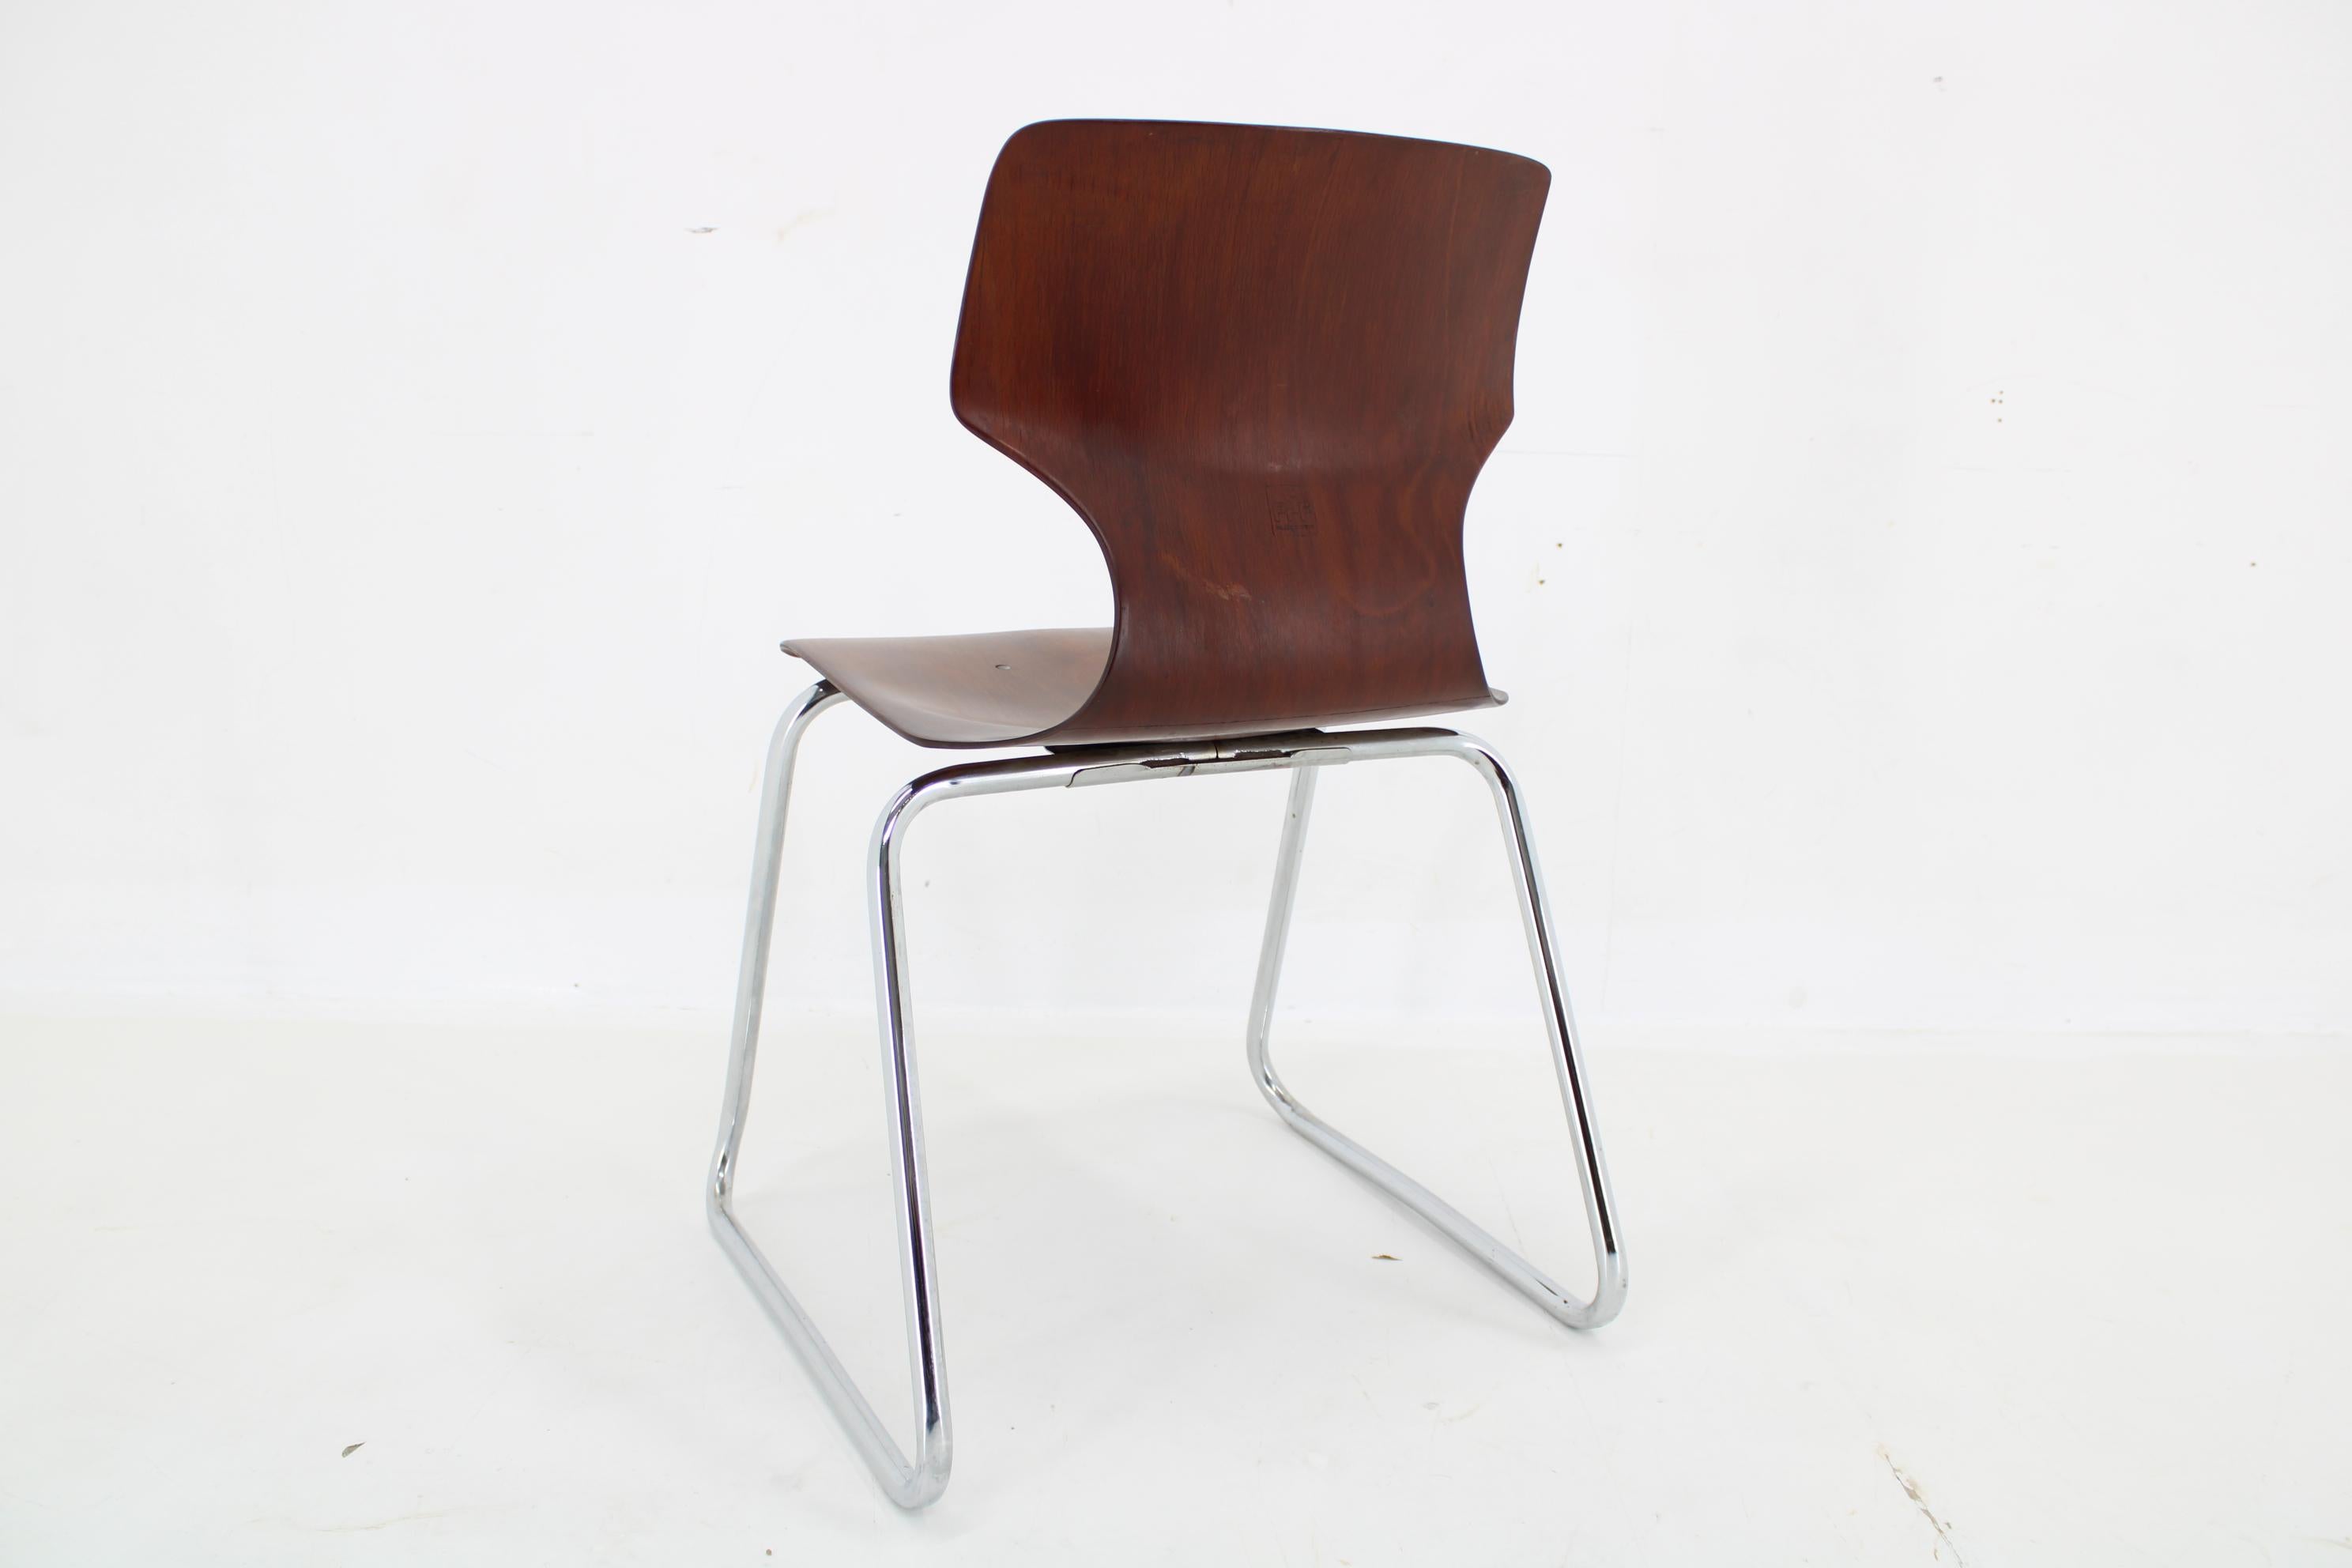 1970s Elmar Flototto Dining or Side Chair, Germany -40 Pieces Available For Sale 1